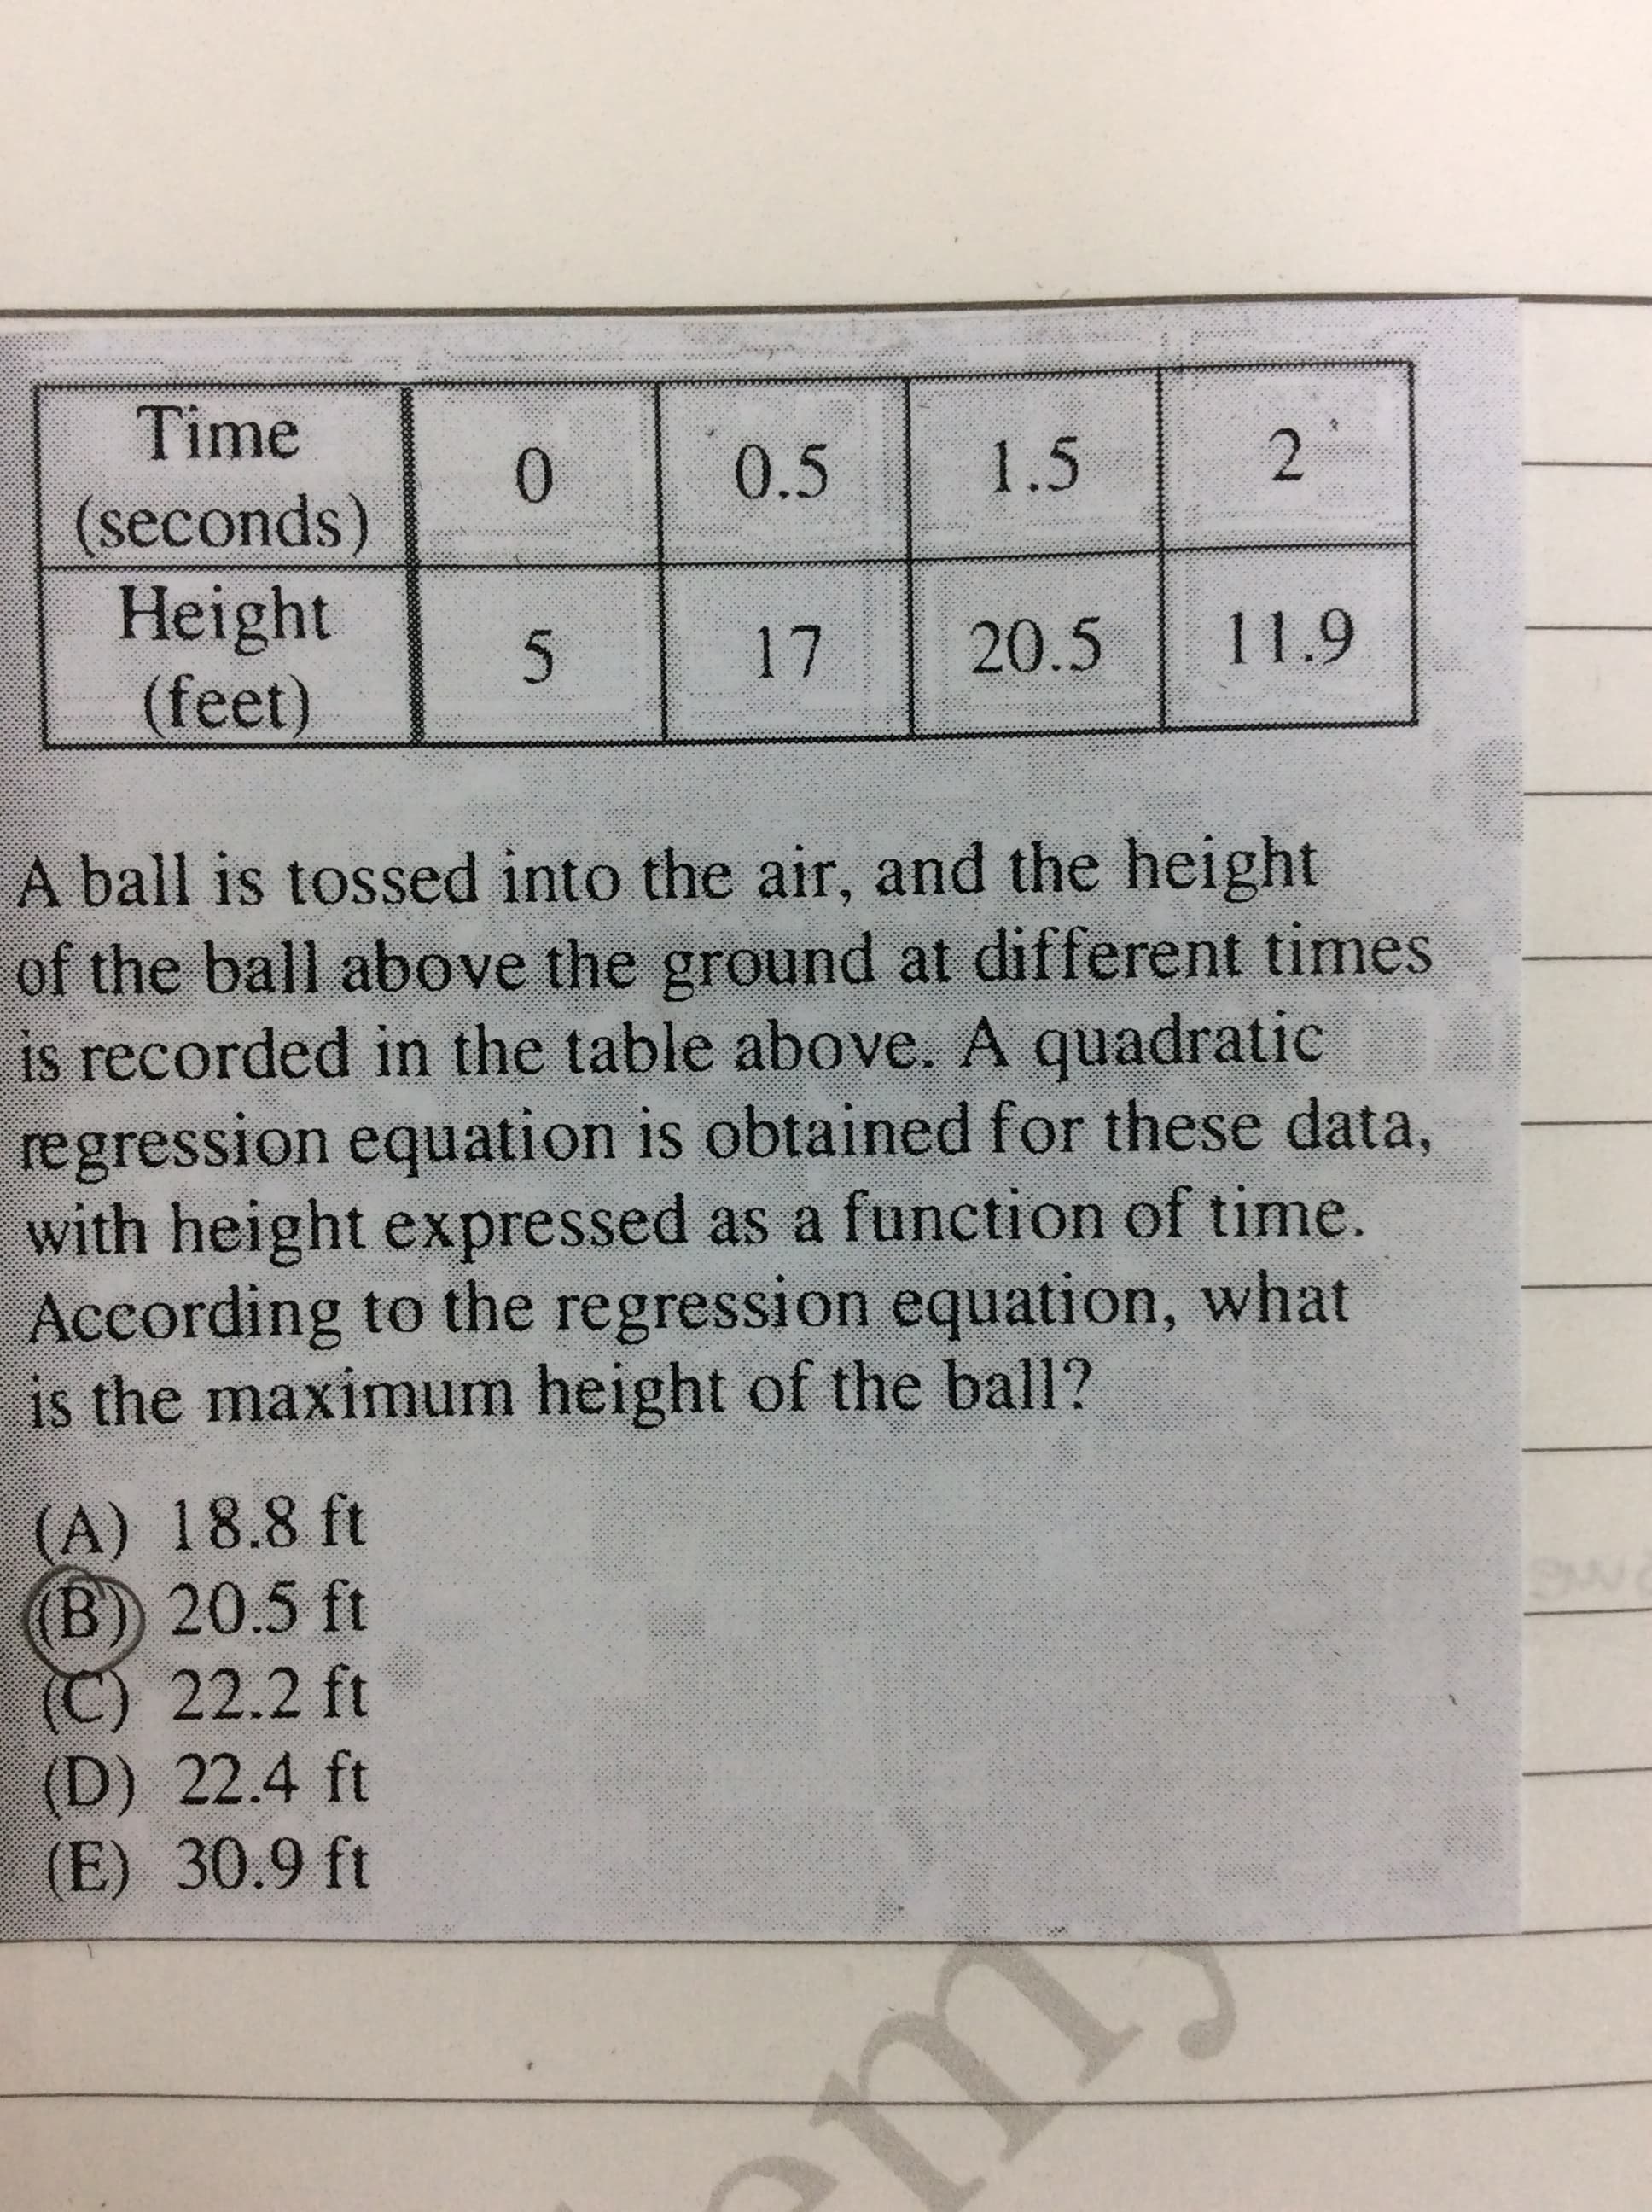 Time
0.5
1.5
0.
(seconds)
Height
(feet)
17
20.5
11.9
A ball is tossed into the air, and the height
of the ball above the ground at different times
is recorded in the table above. A quadratic
regression equation is obtained for these data,
with height expressed as a function of time.
According to the regression equation, what
is the maximum height of the ball?
(A) 18.8 ft
(B) 20.5 ft
C) 22.2 ft
(D) 22.4 ft
(E) 30.9 ft
2.
